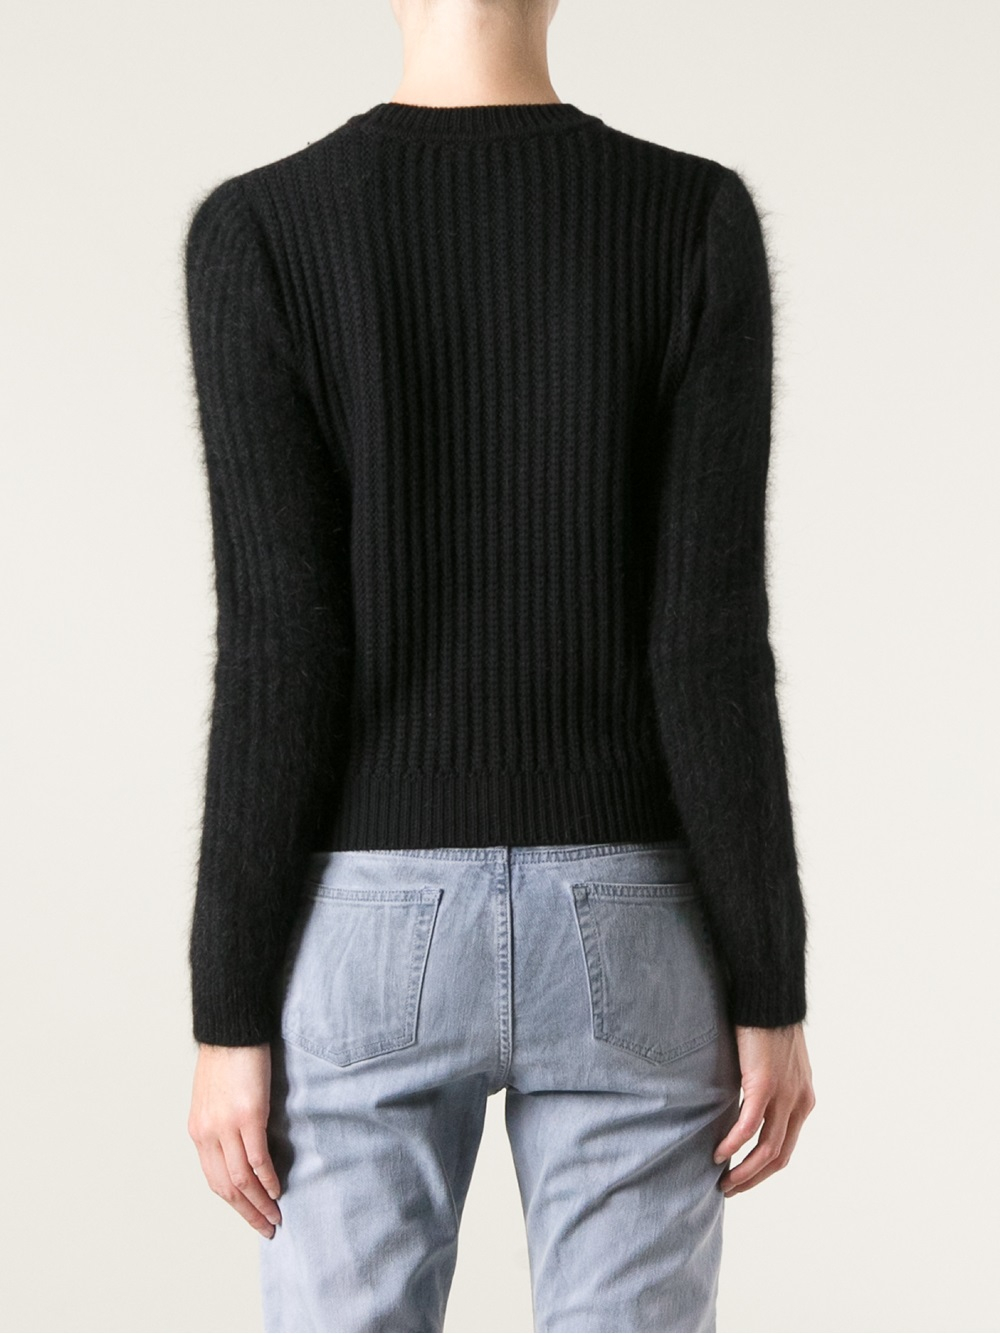 Lyst - Kenzo Embroidered Ribbed Sweater in Black